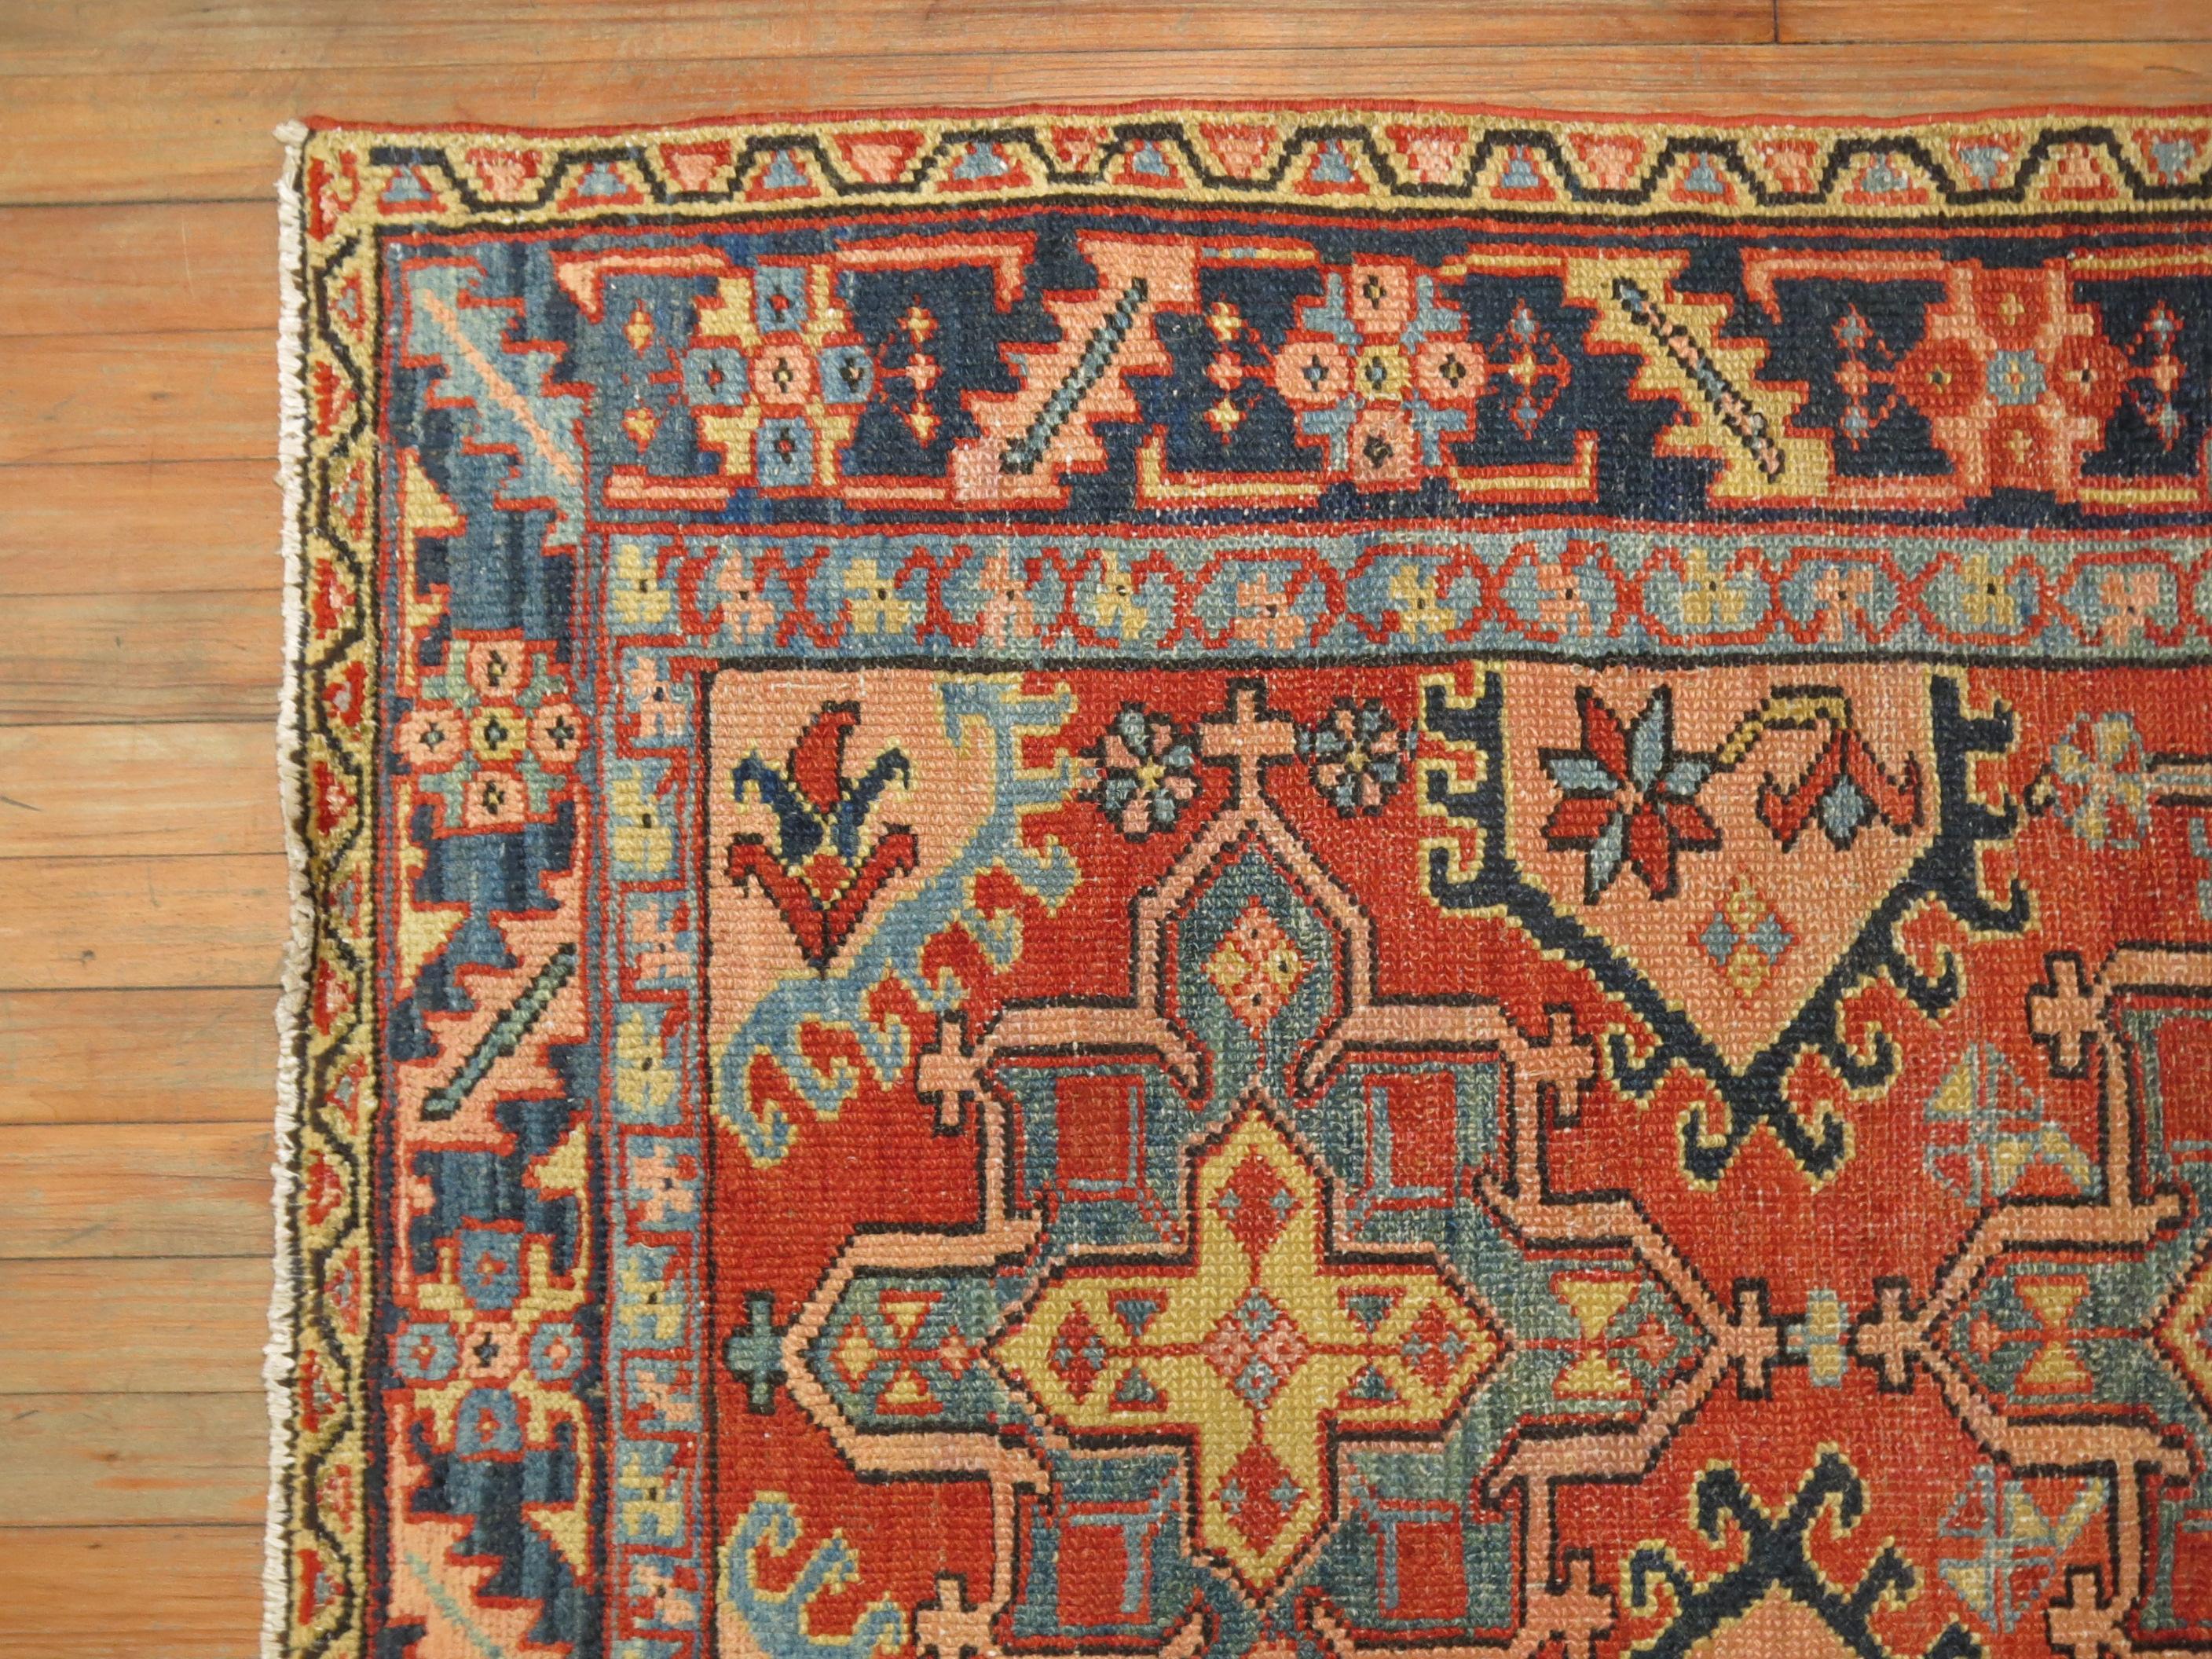 Hand-Woven Traditional Rustic Persian Heriz Scatter Rug, Early 20th Century